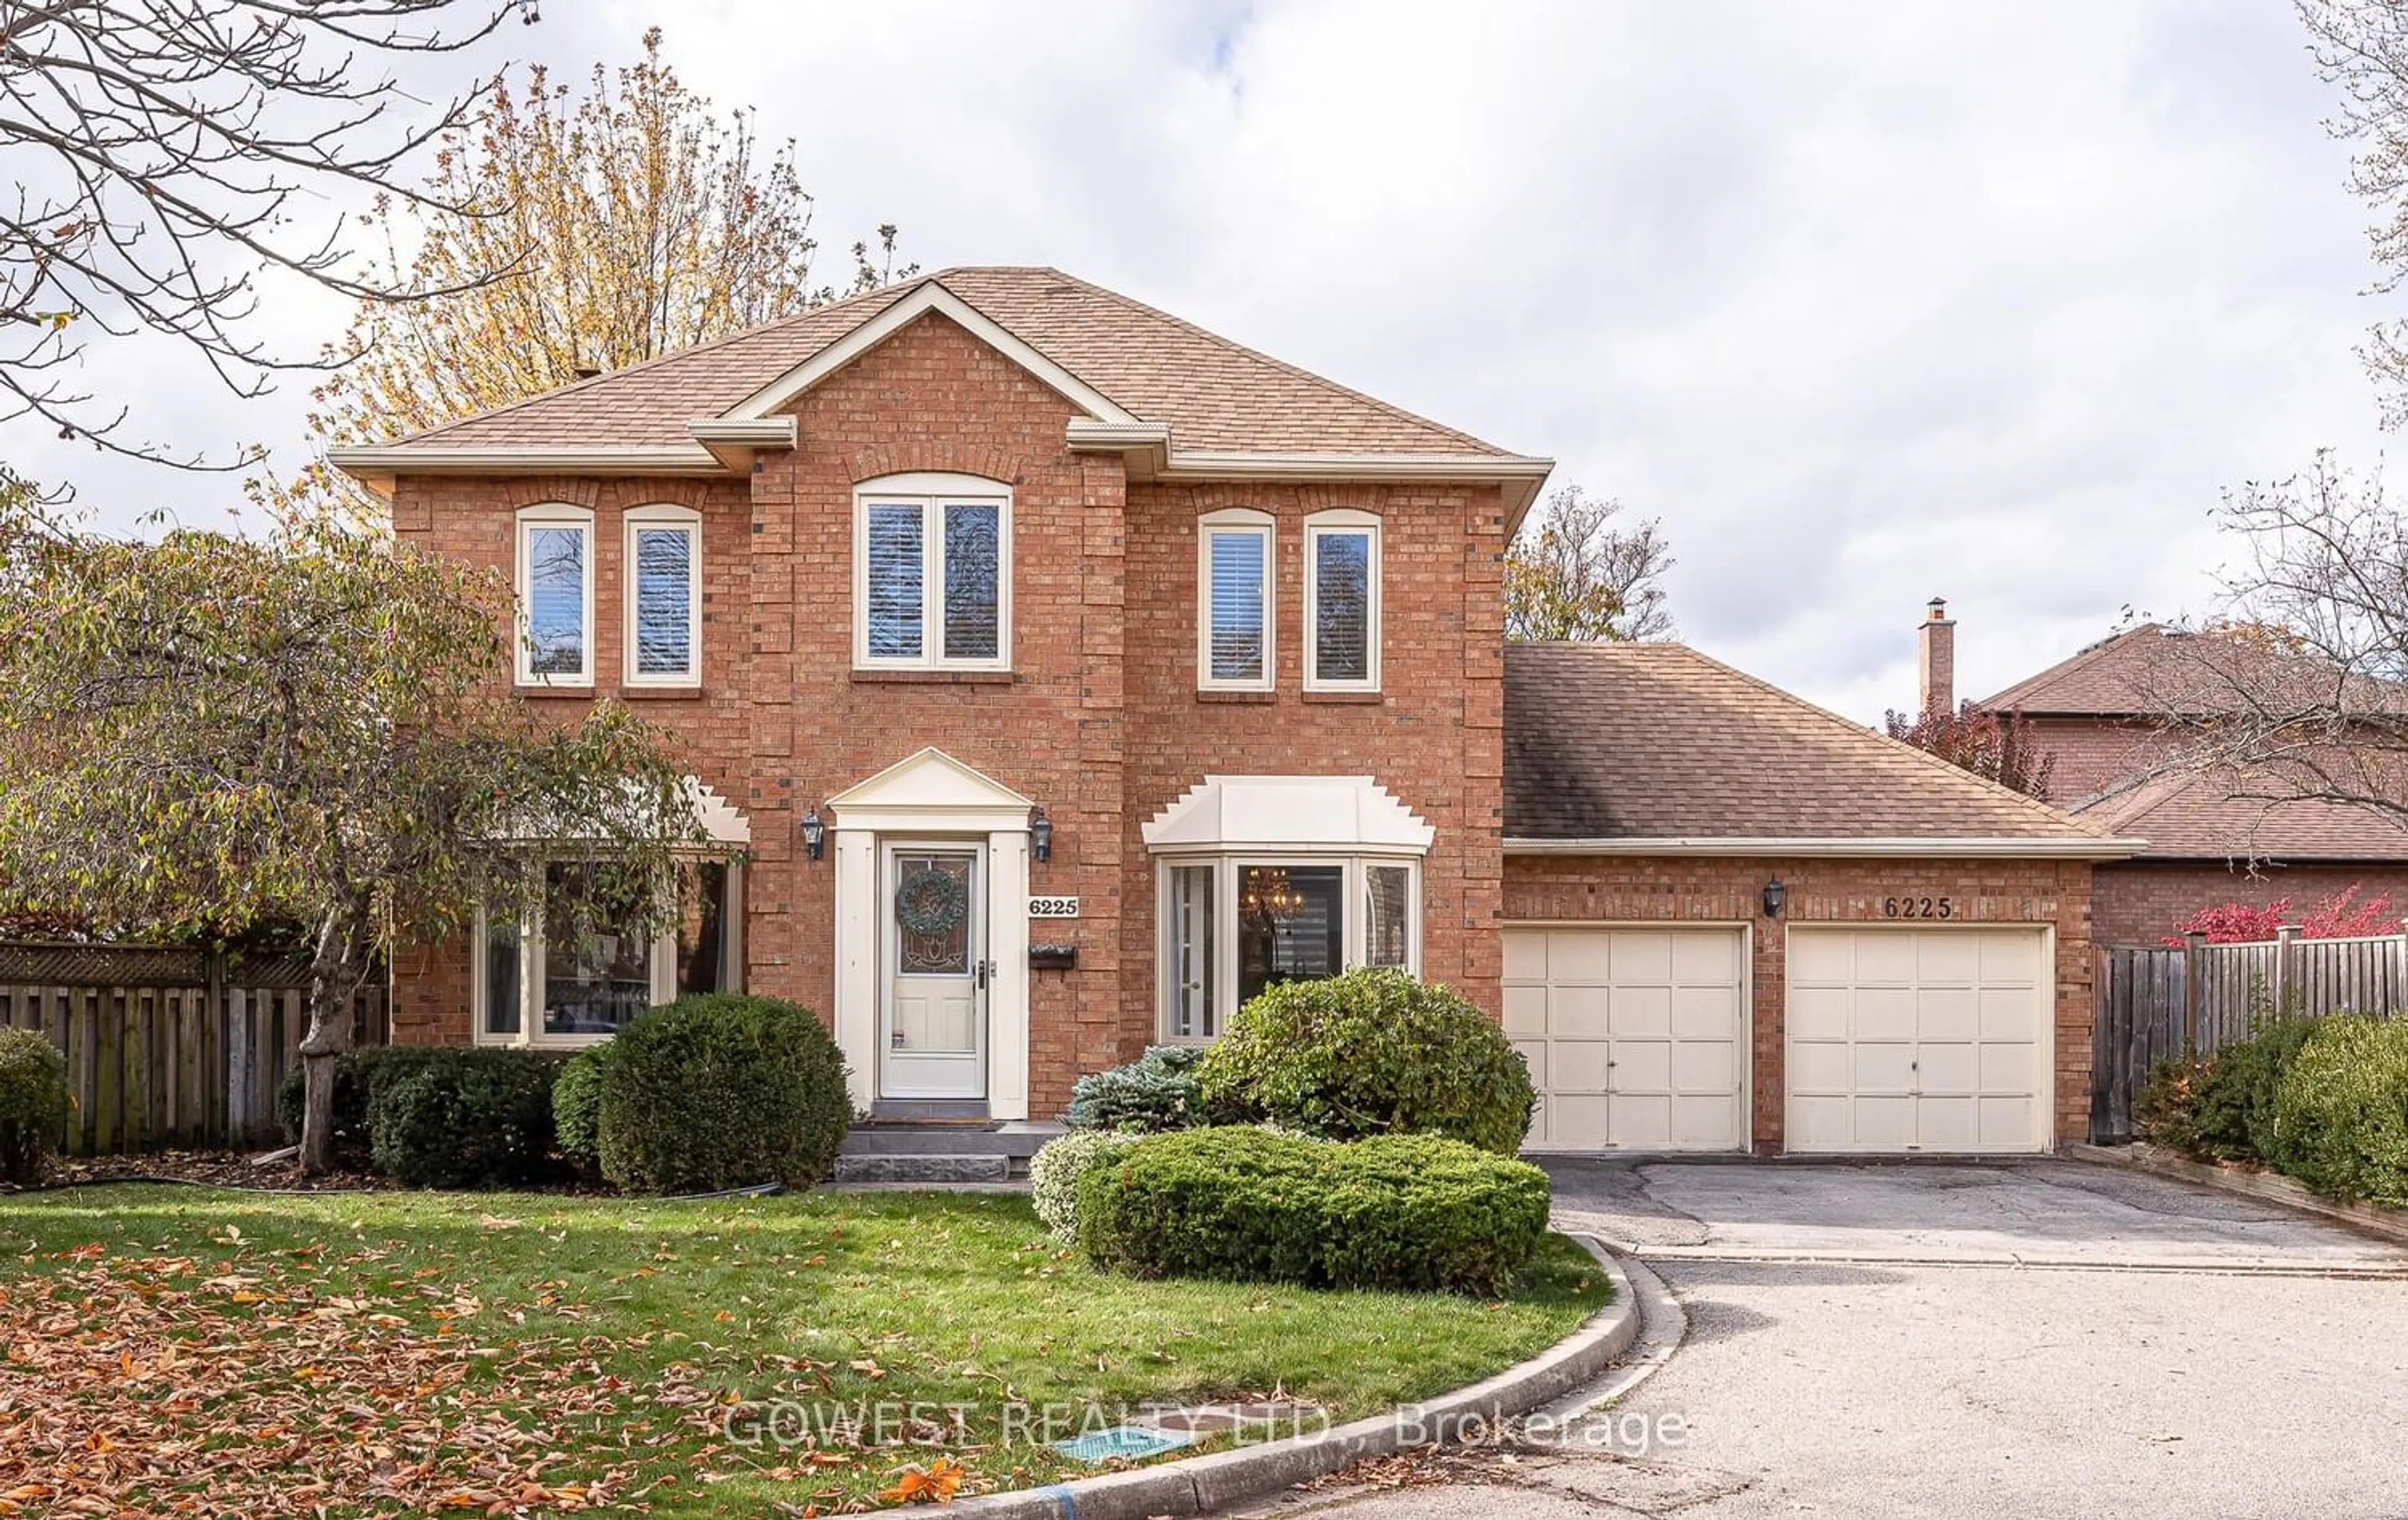 Home with brick exterior material for 6225 Tenth Line, Mississauga Ontario L5N 5T3